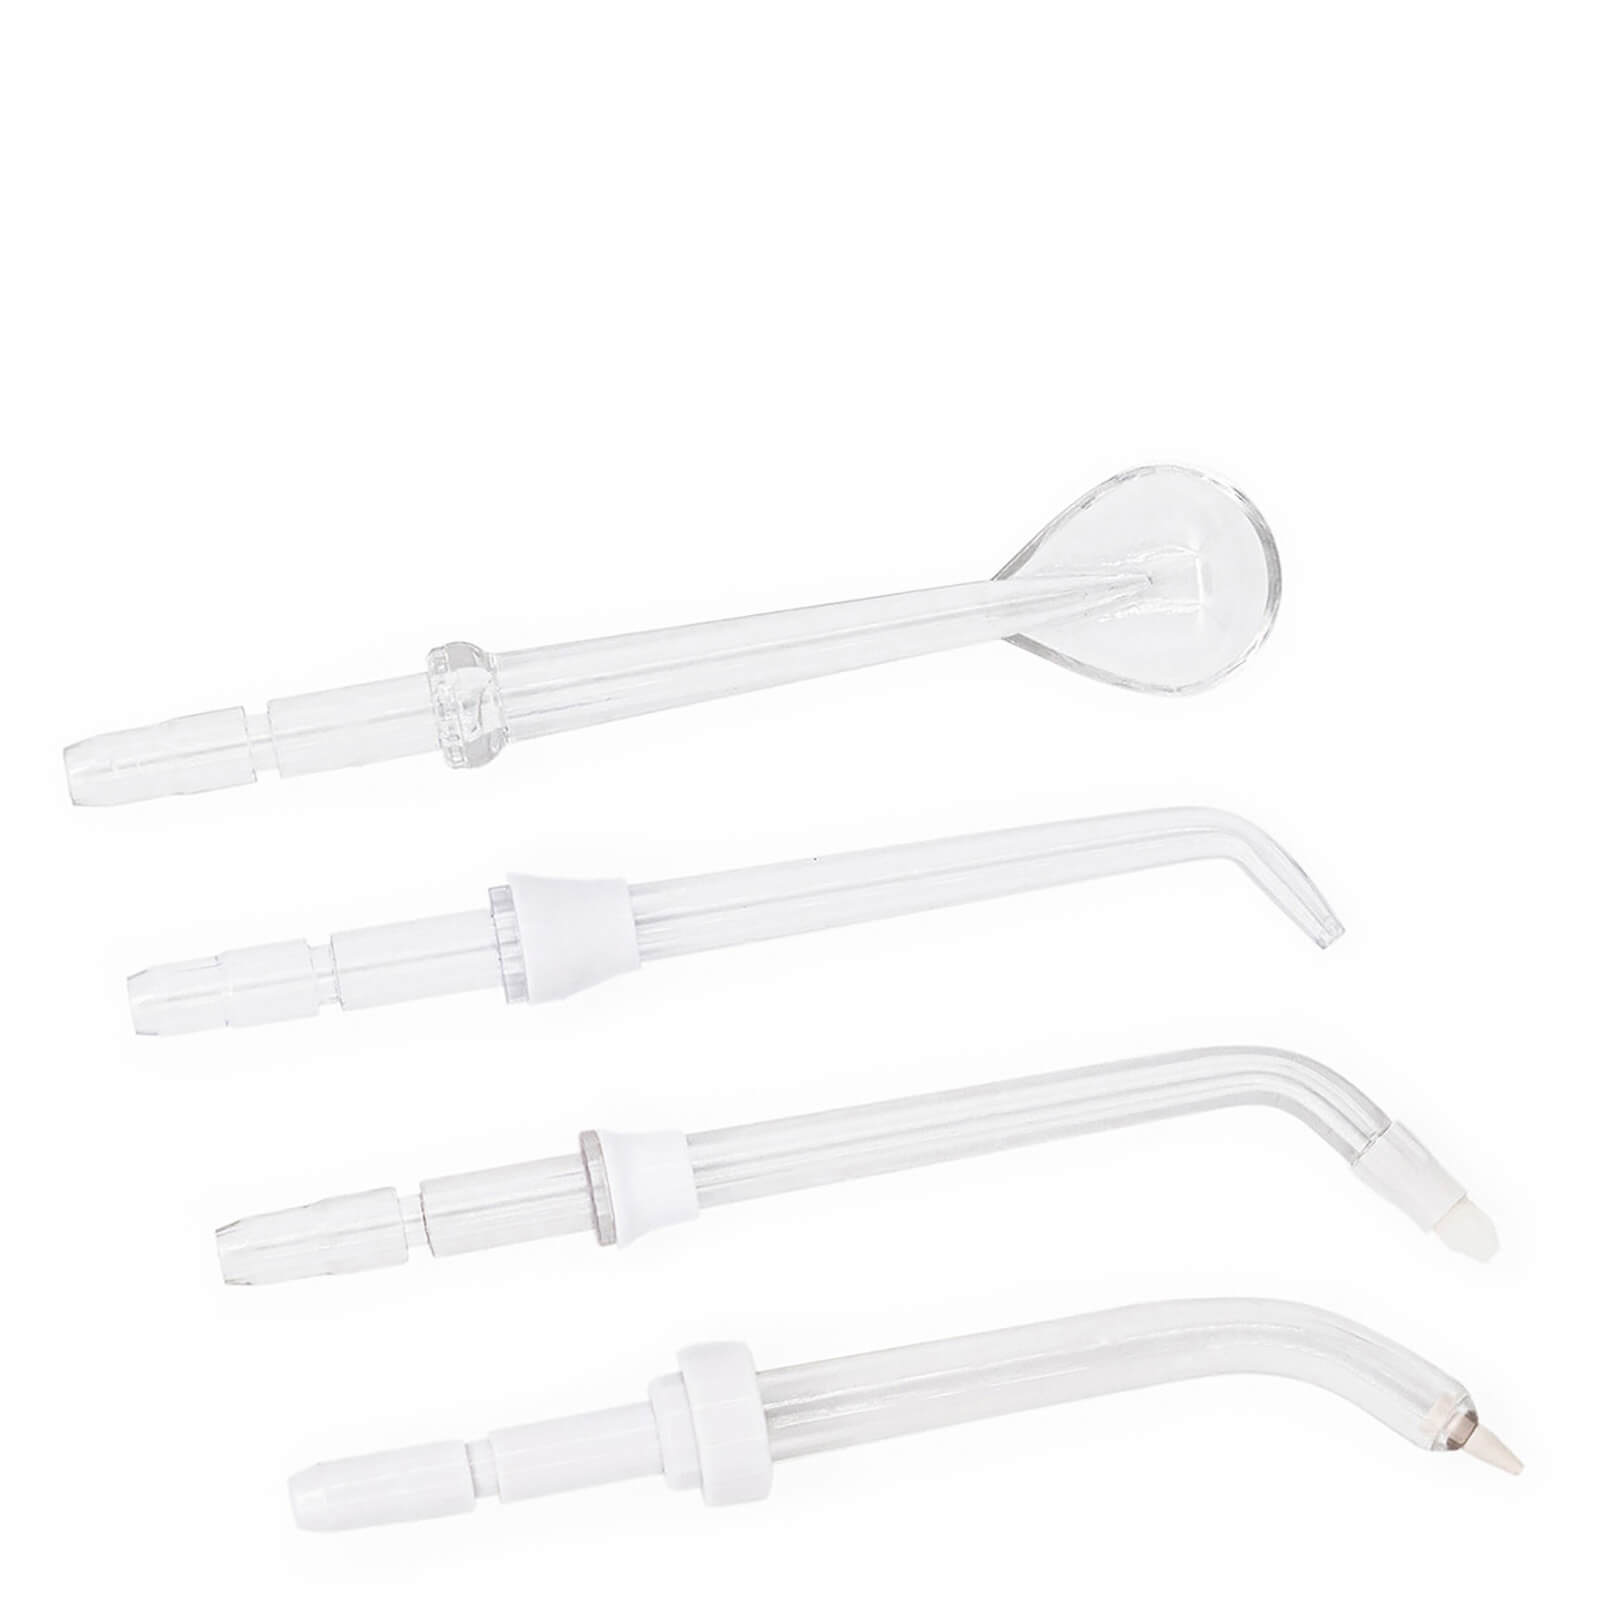 Spotlight Oral Care Water Flosser Replacement Tips